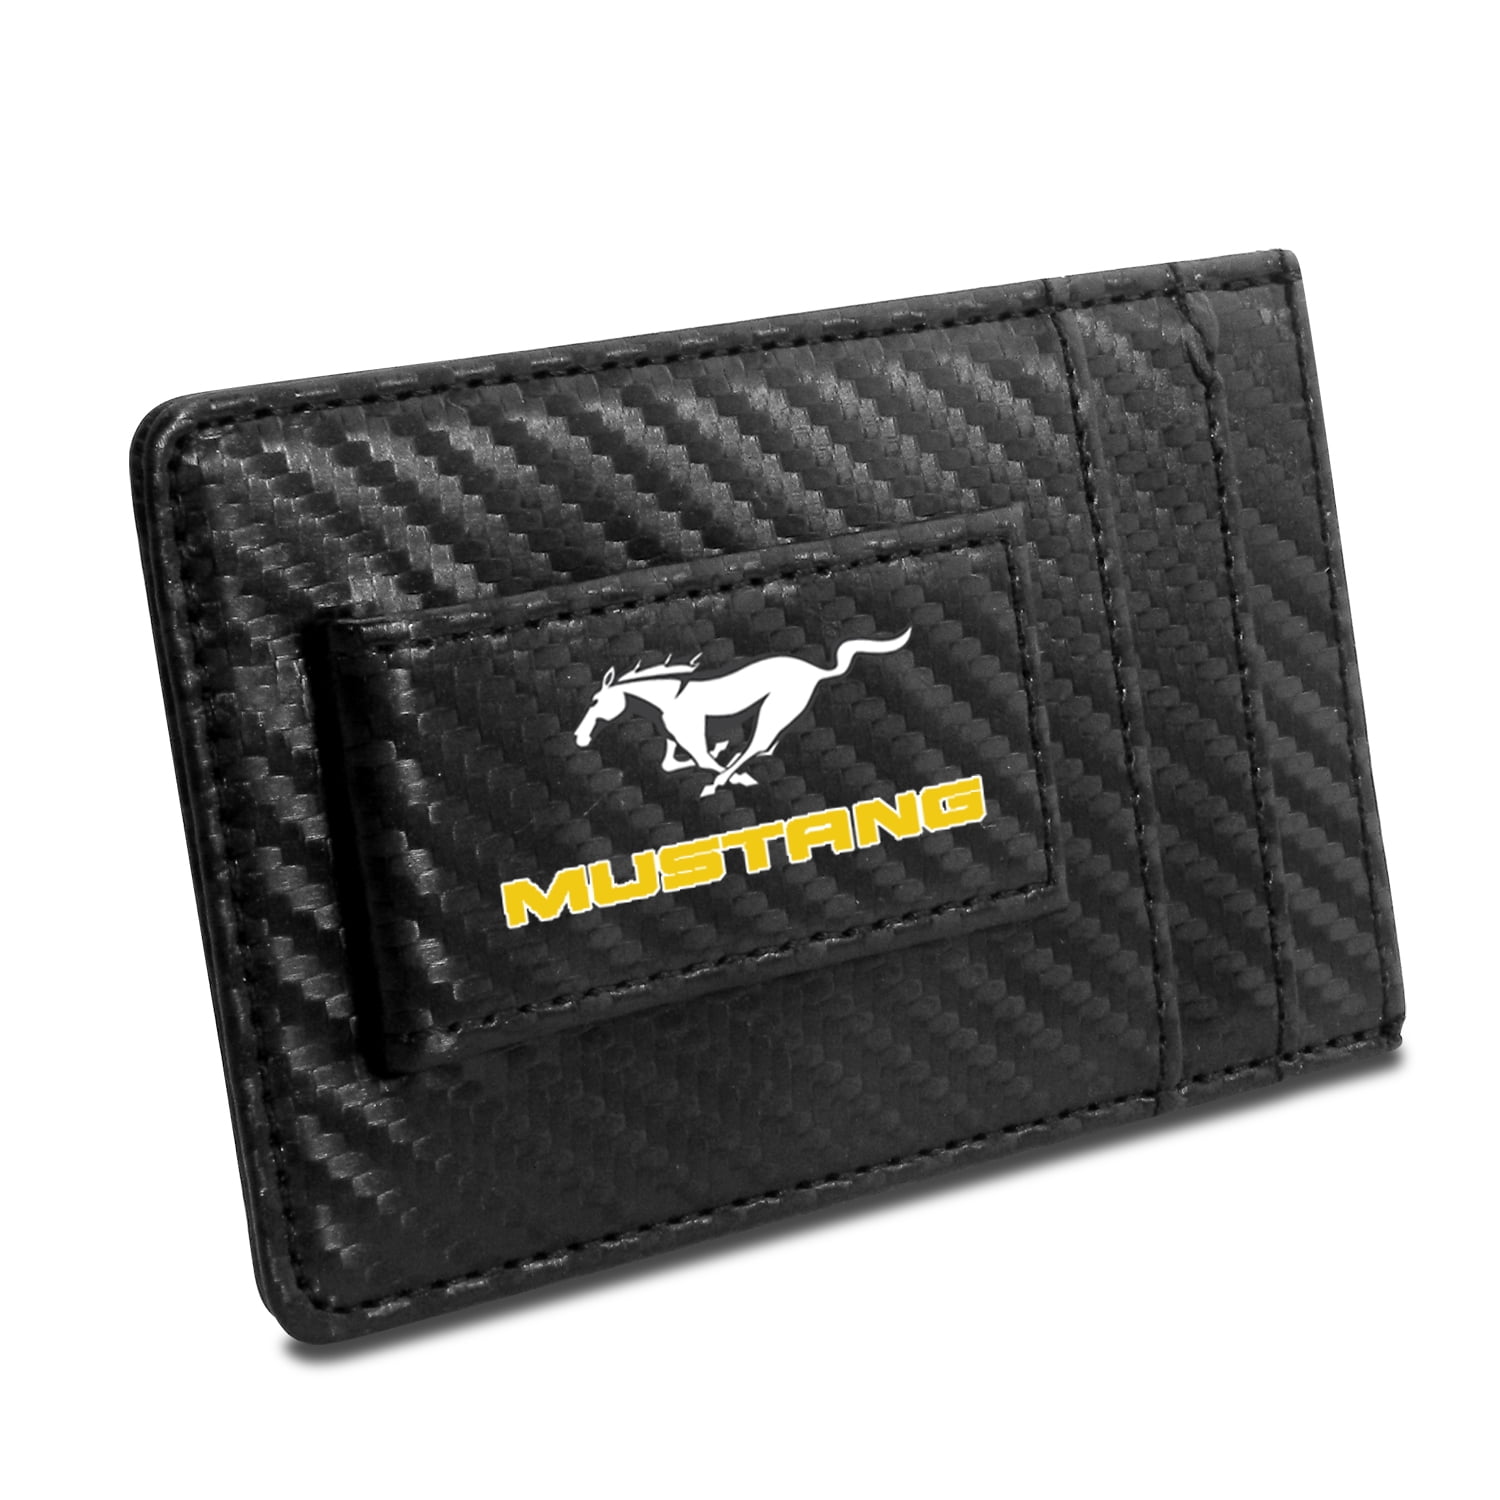 Mustang GT in Yellow Black Carbon Fiber Texture Graphic UV Metal License Plate